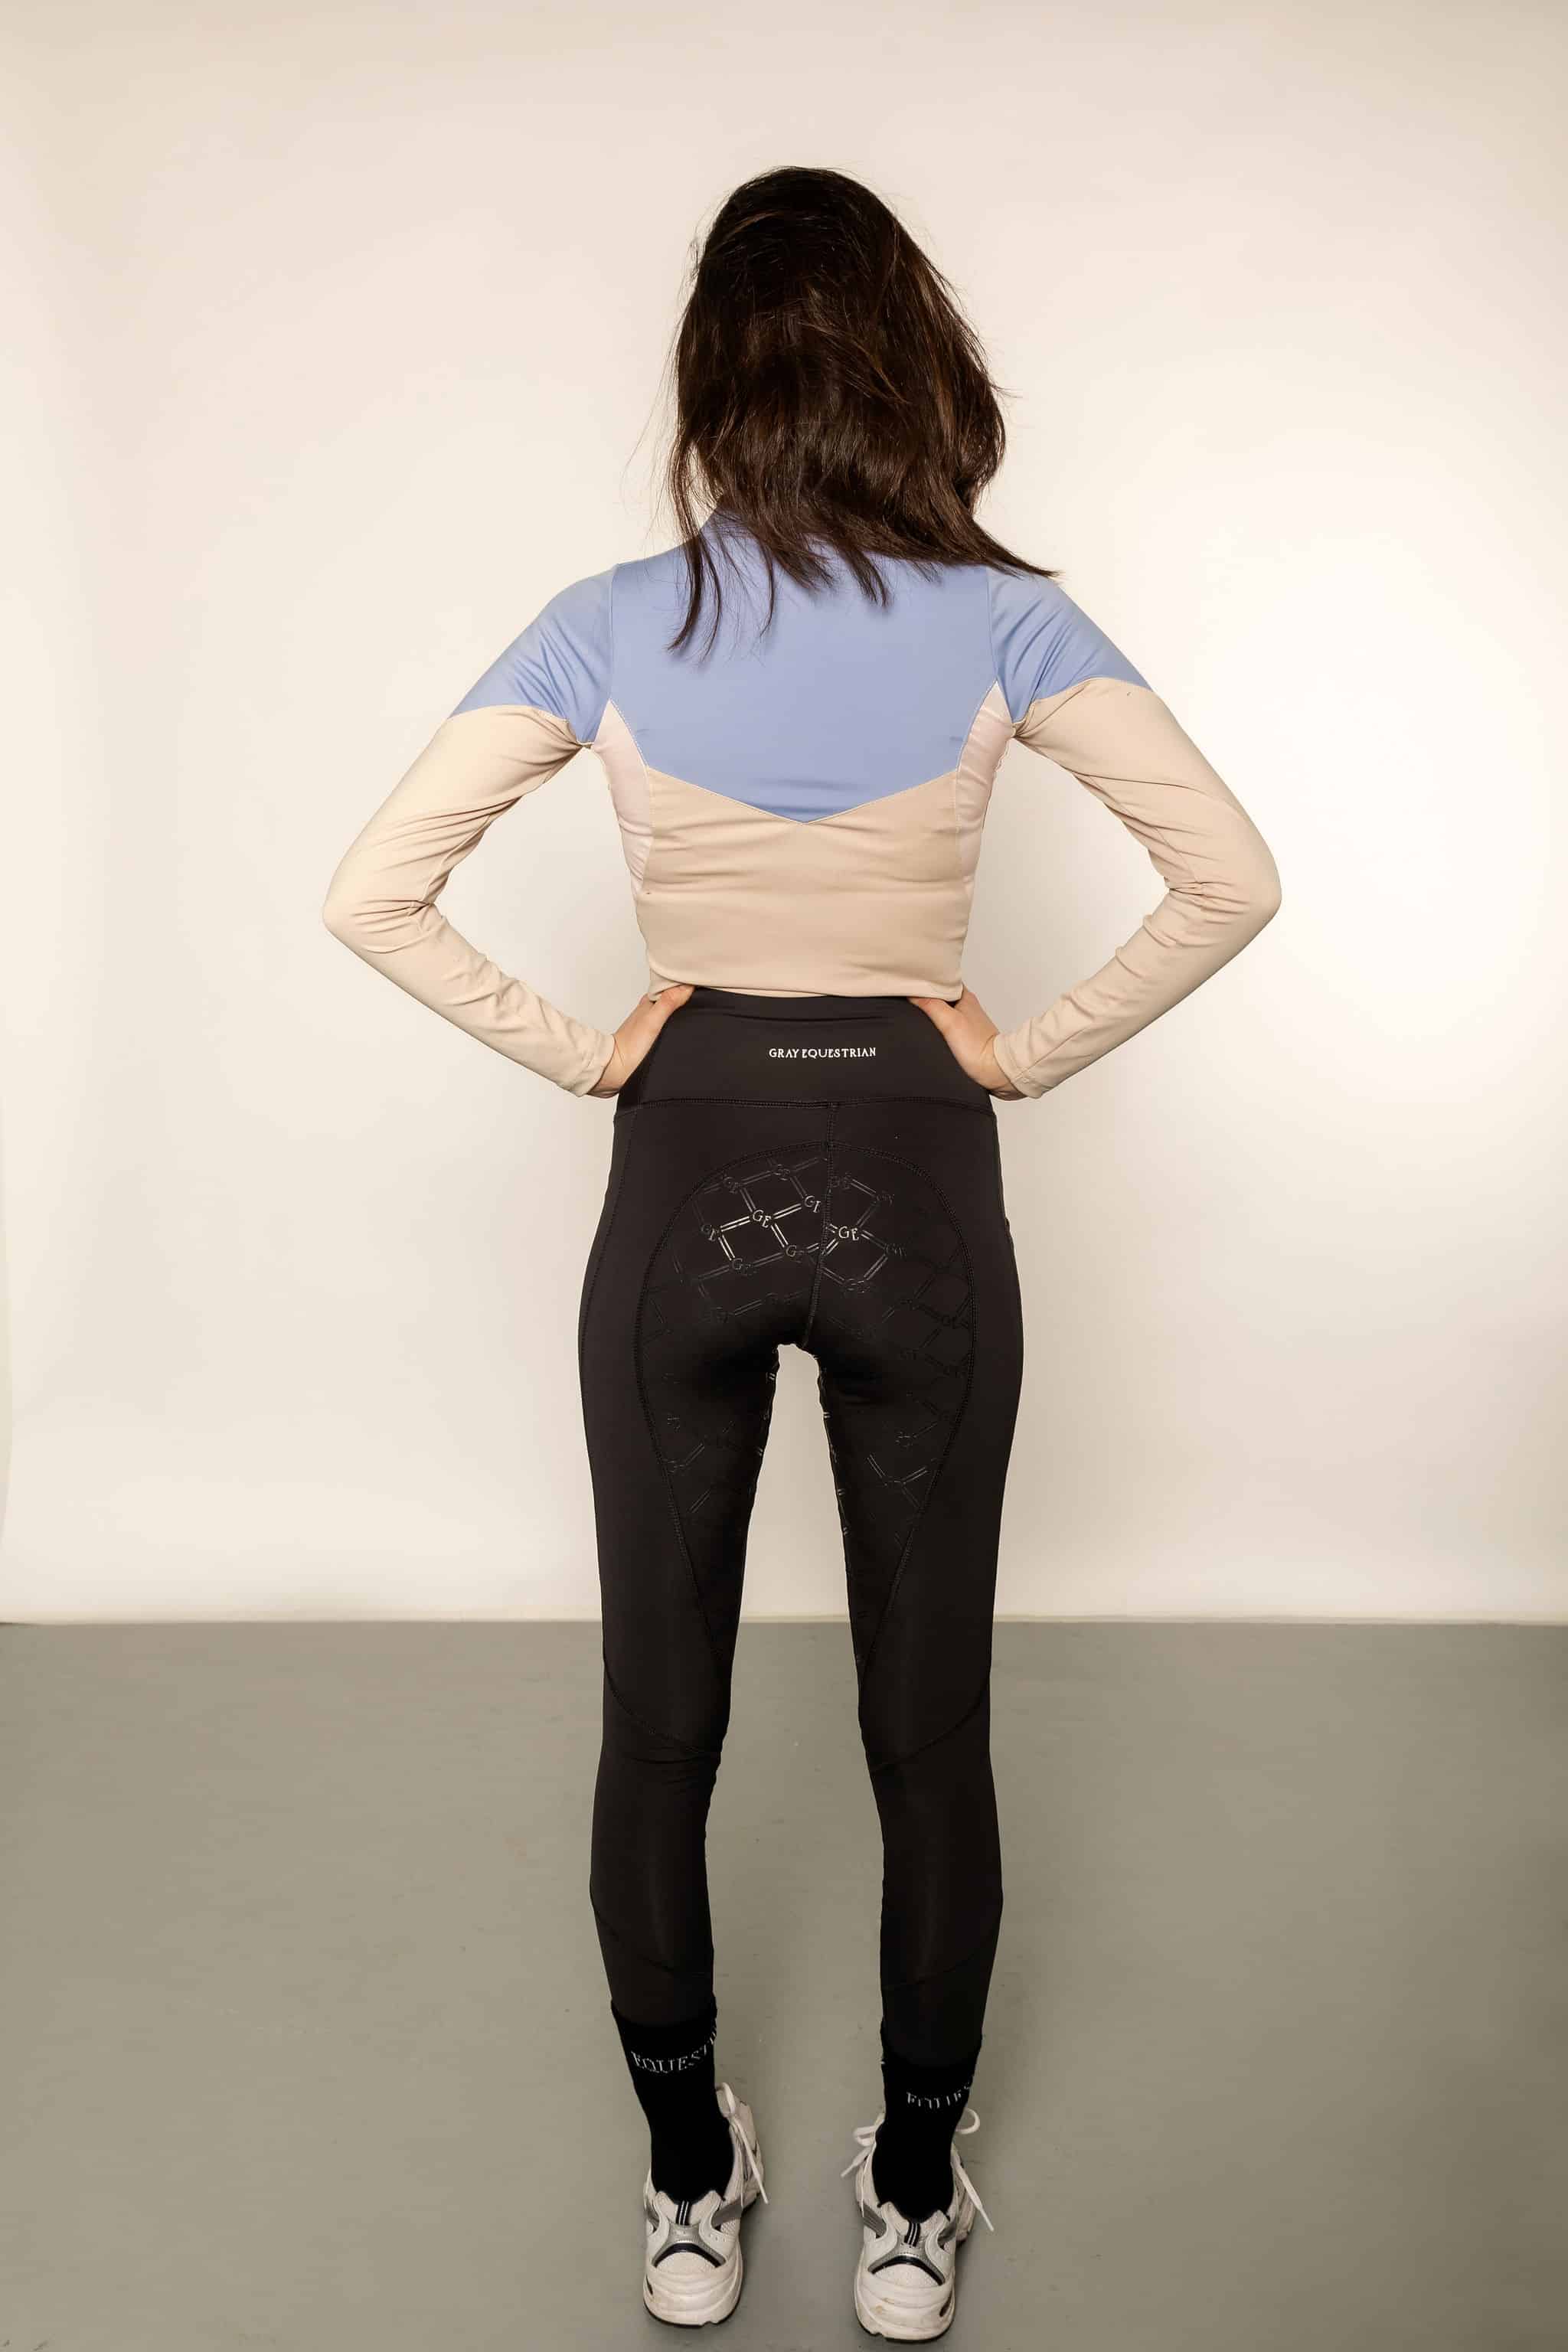 The behind of a blue and beige base layer with black leggings.